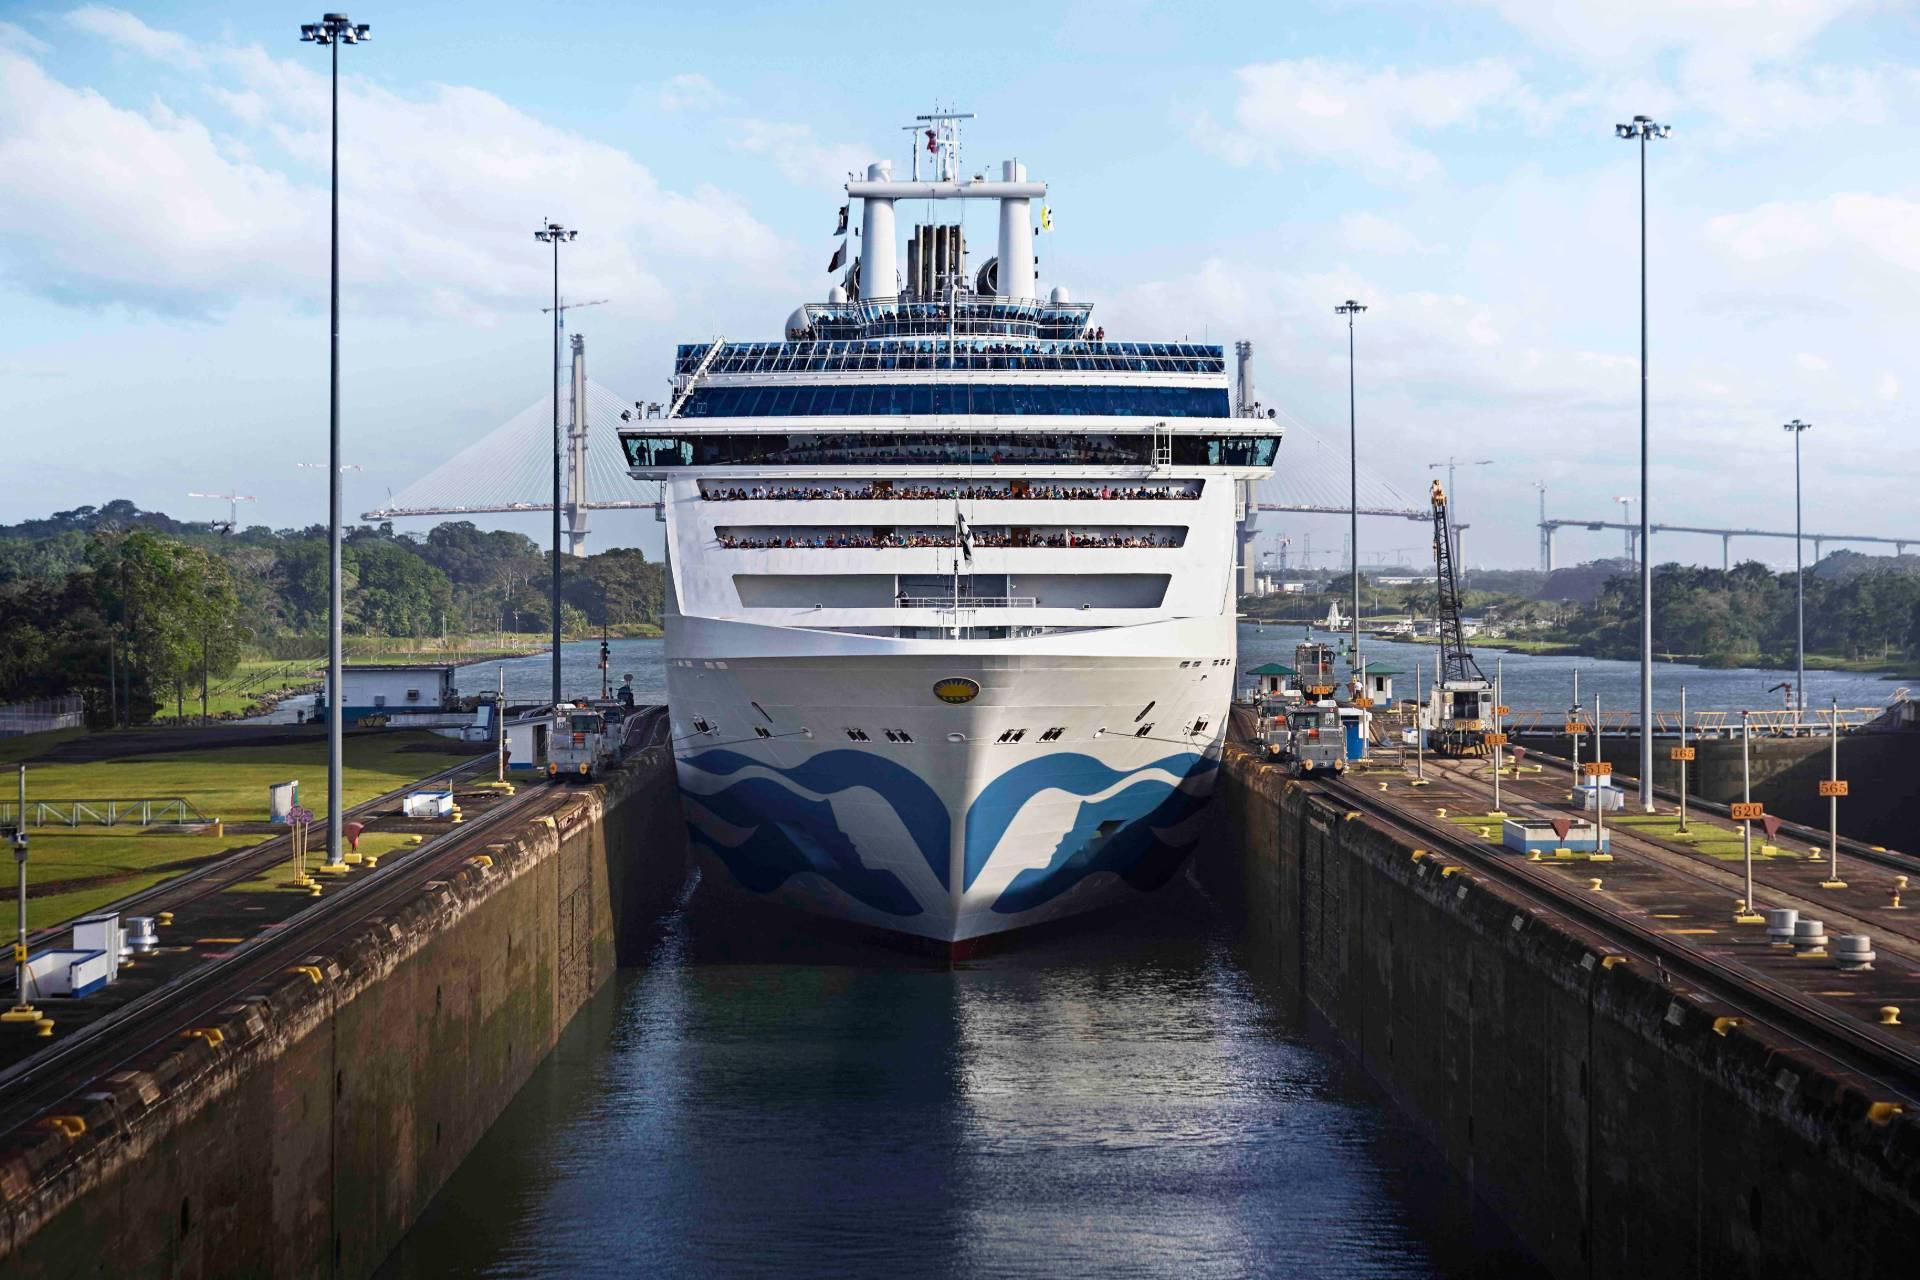 panama canal cruises from new orleans